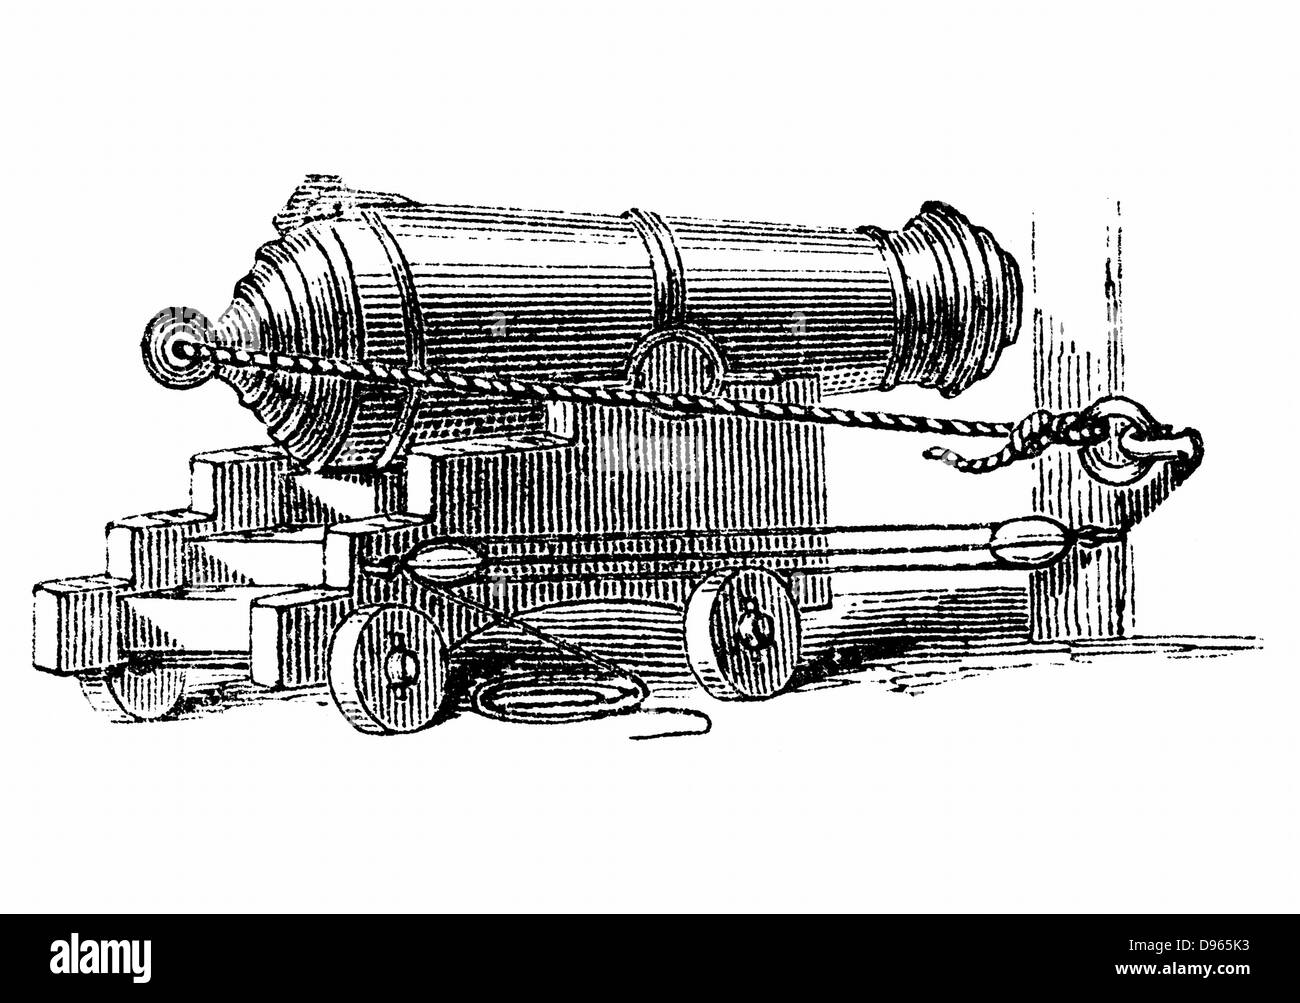 Carronade, short piece of naval ordnance with large calibre chamber, like a mortar. Name said to come from Carron Ironworks, Scotland. Wood engraving, c1884. Stock Photo